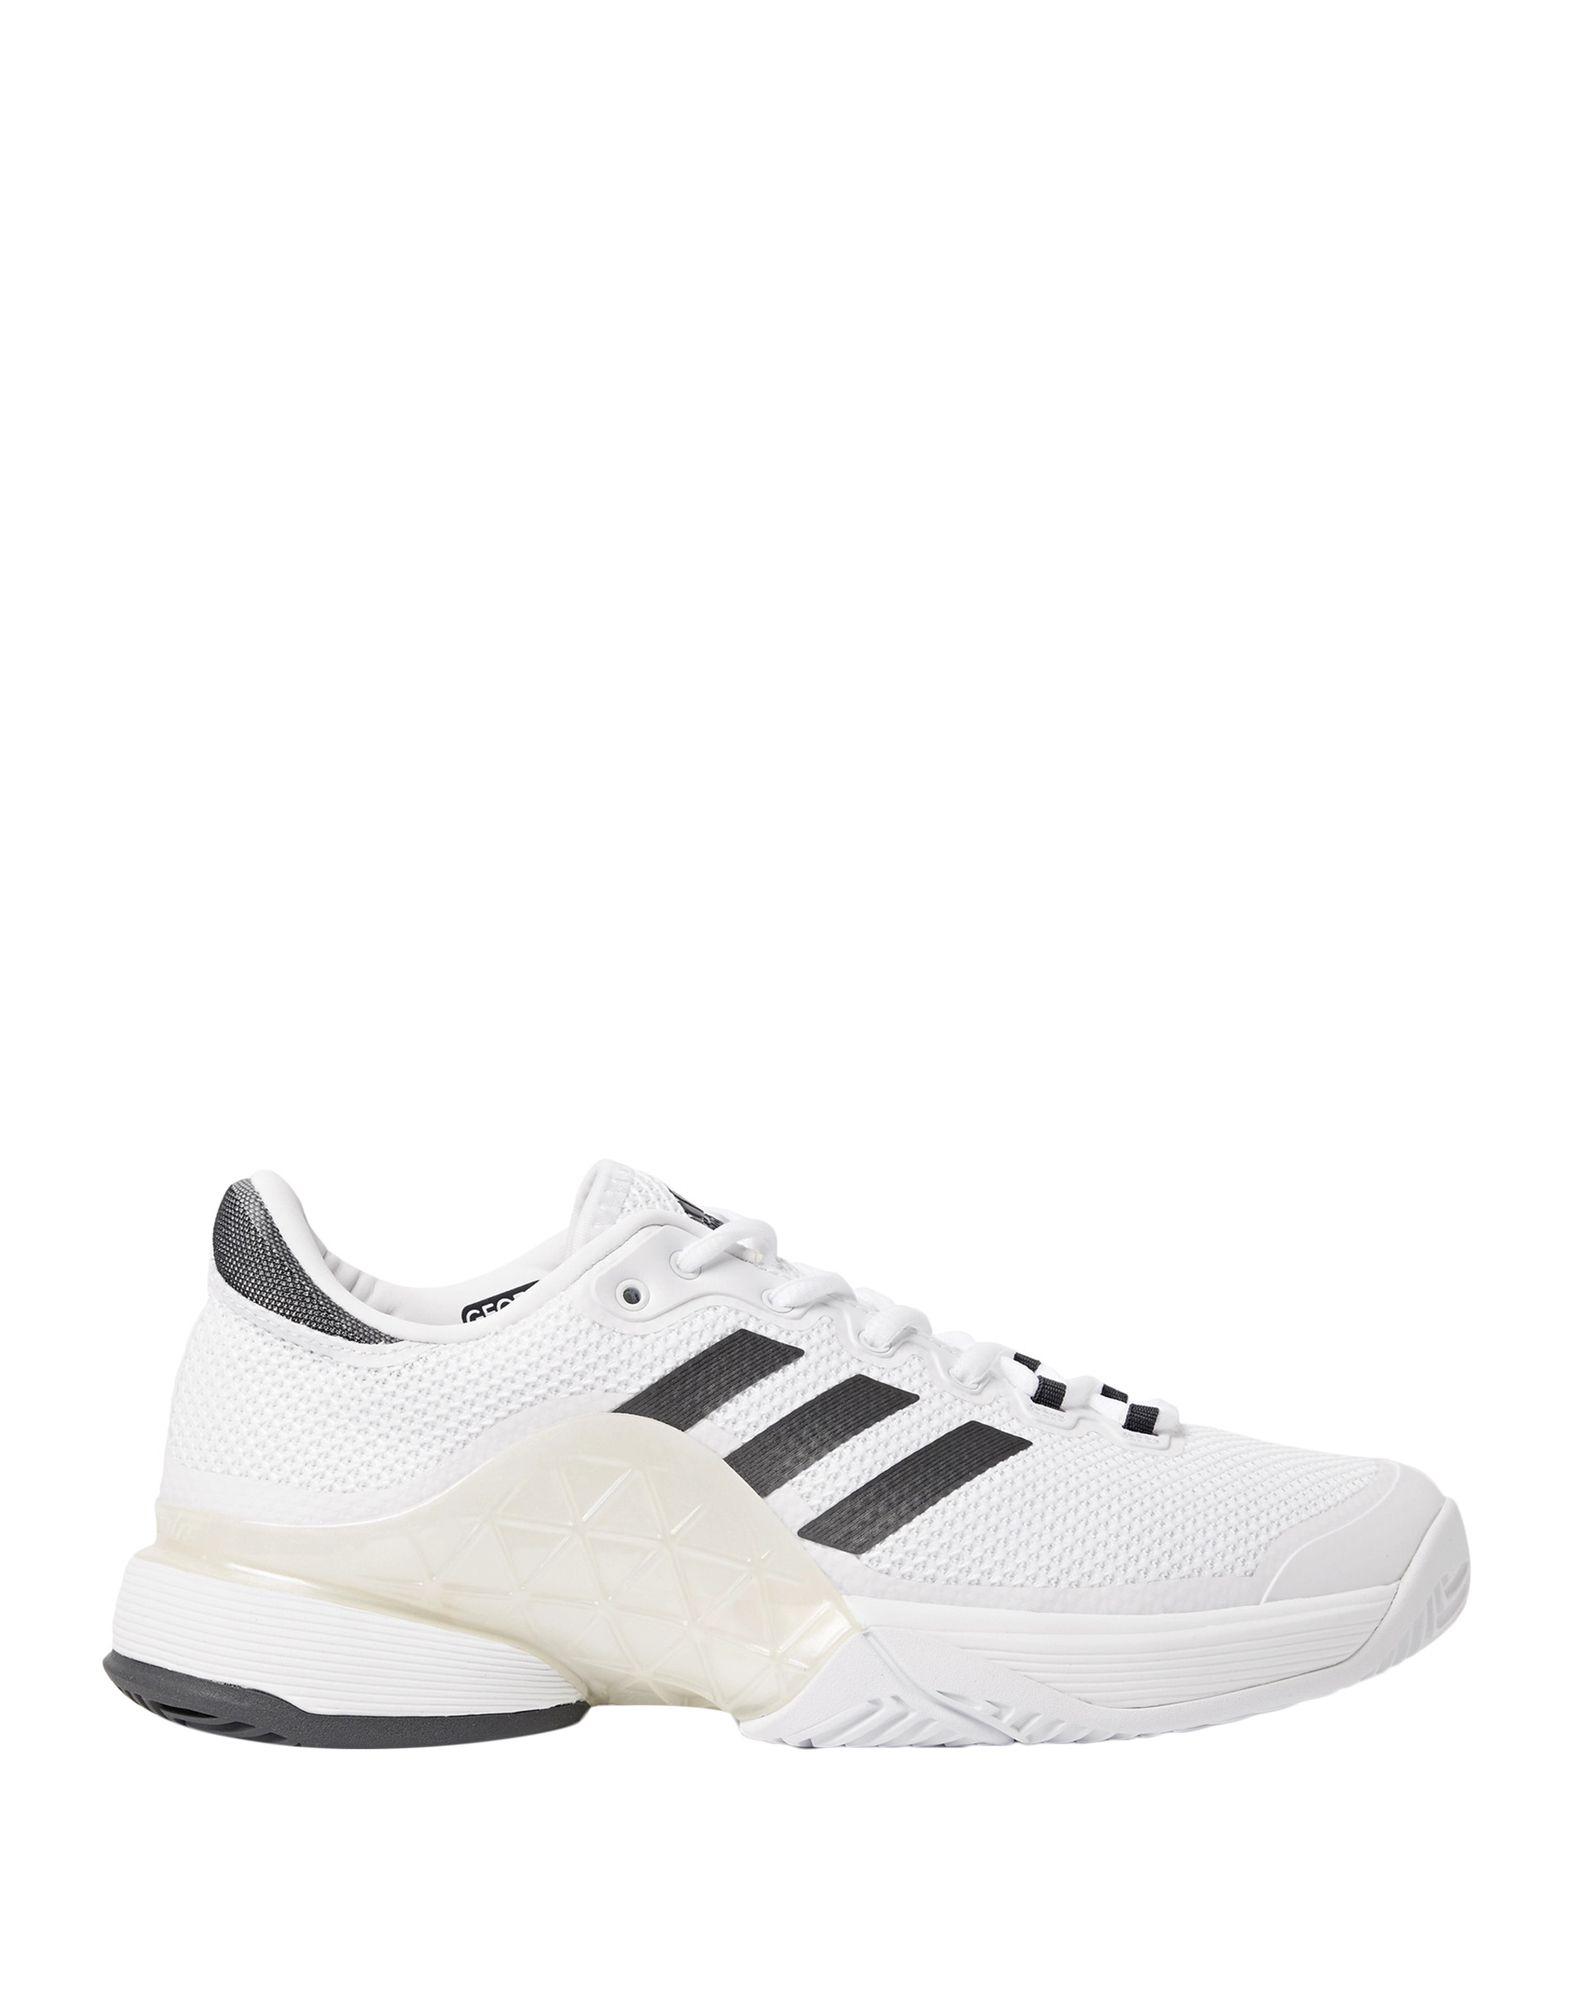 adidas Rubber Low-tops & Sneakers in White for Men - Lyst